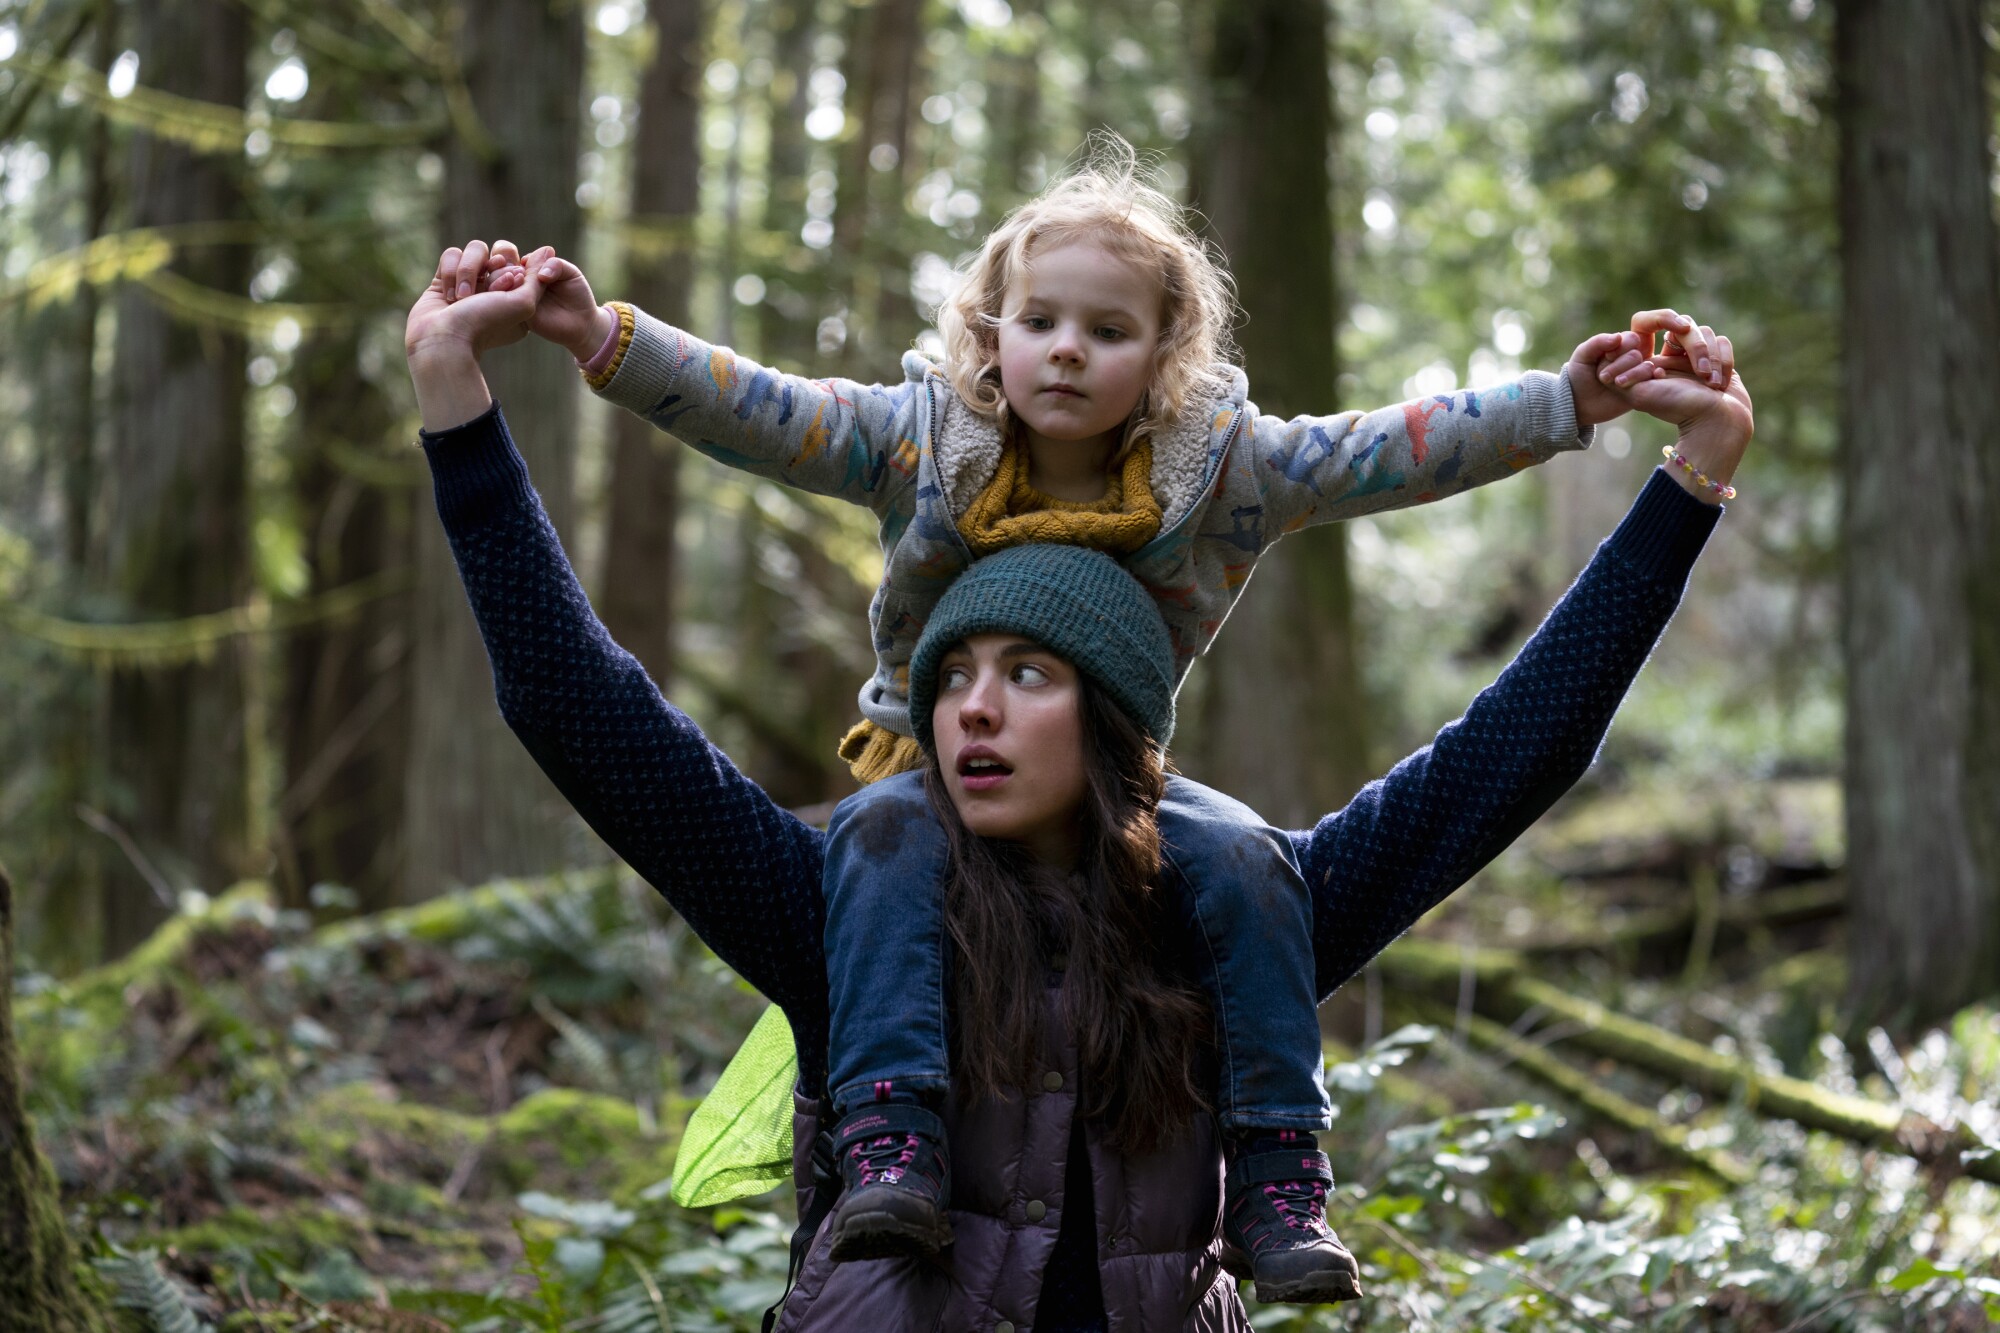 Margaret Qualley carries Rylea Nevaeh Whittet on her shoulders on a walk through the woods in a scene from  "Maid."